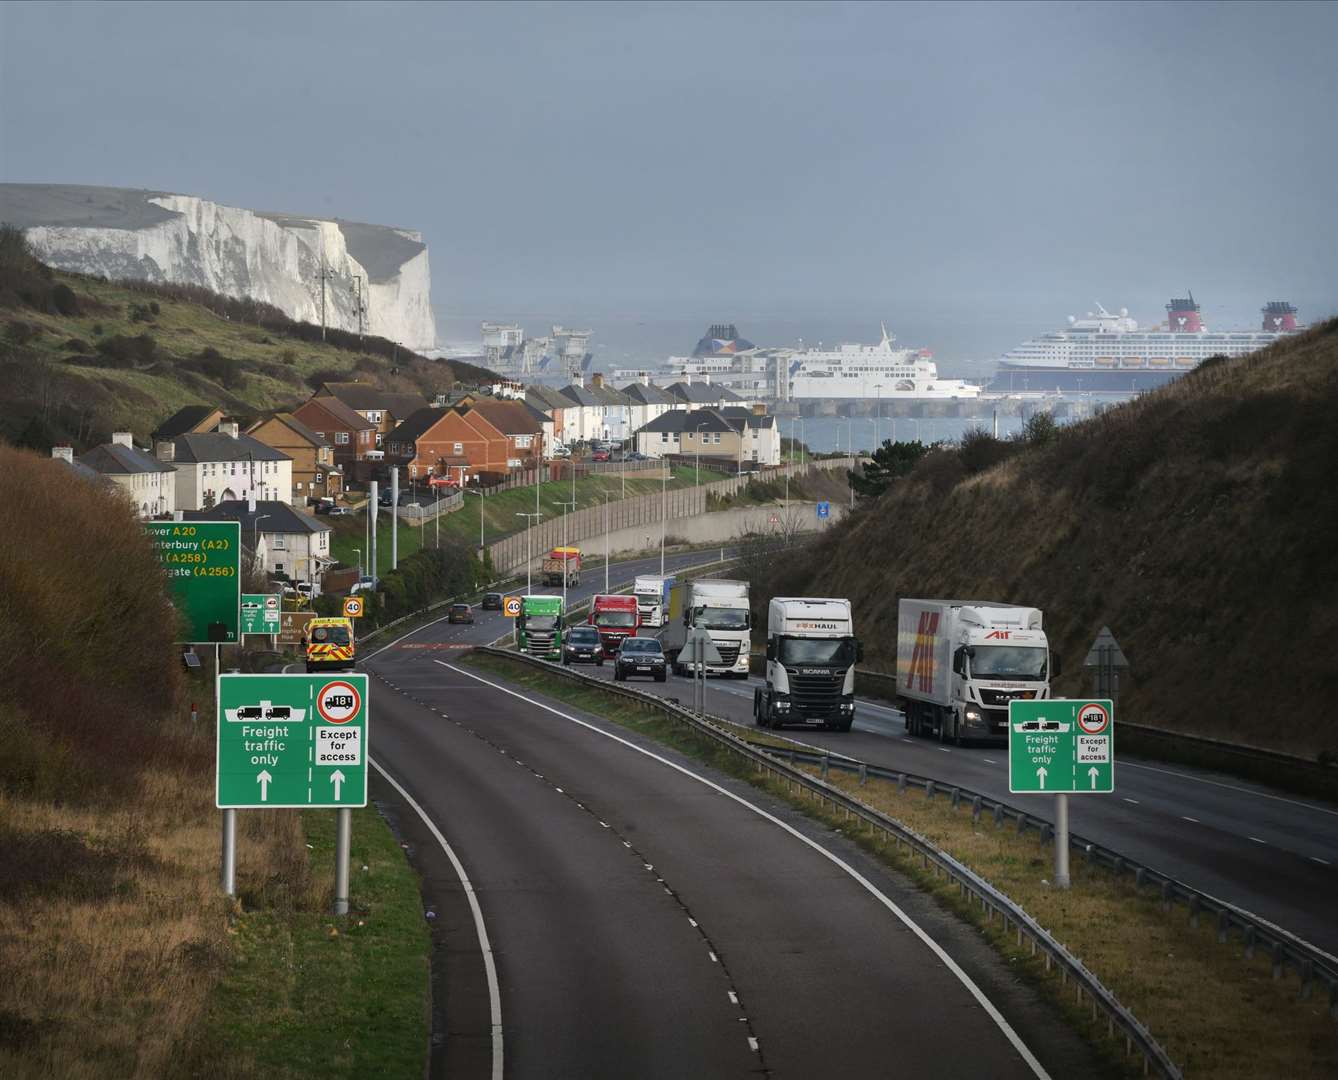 Freight lorries and traffic pass through the port of Dover - closest part of the UK to France and ferry terminal to the continent of Europe. (43640251)